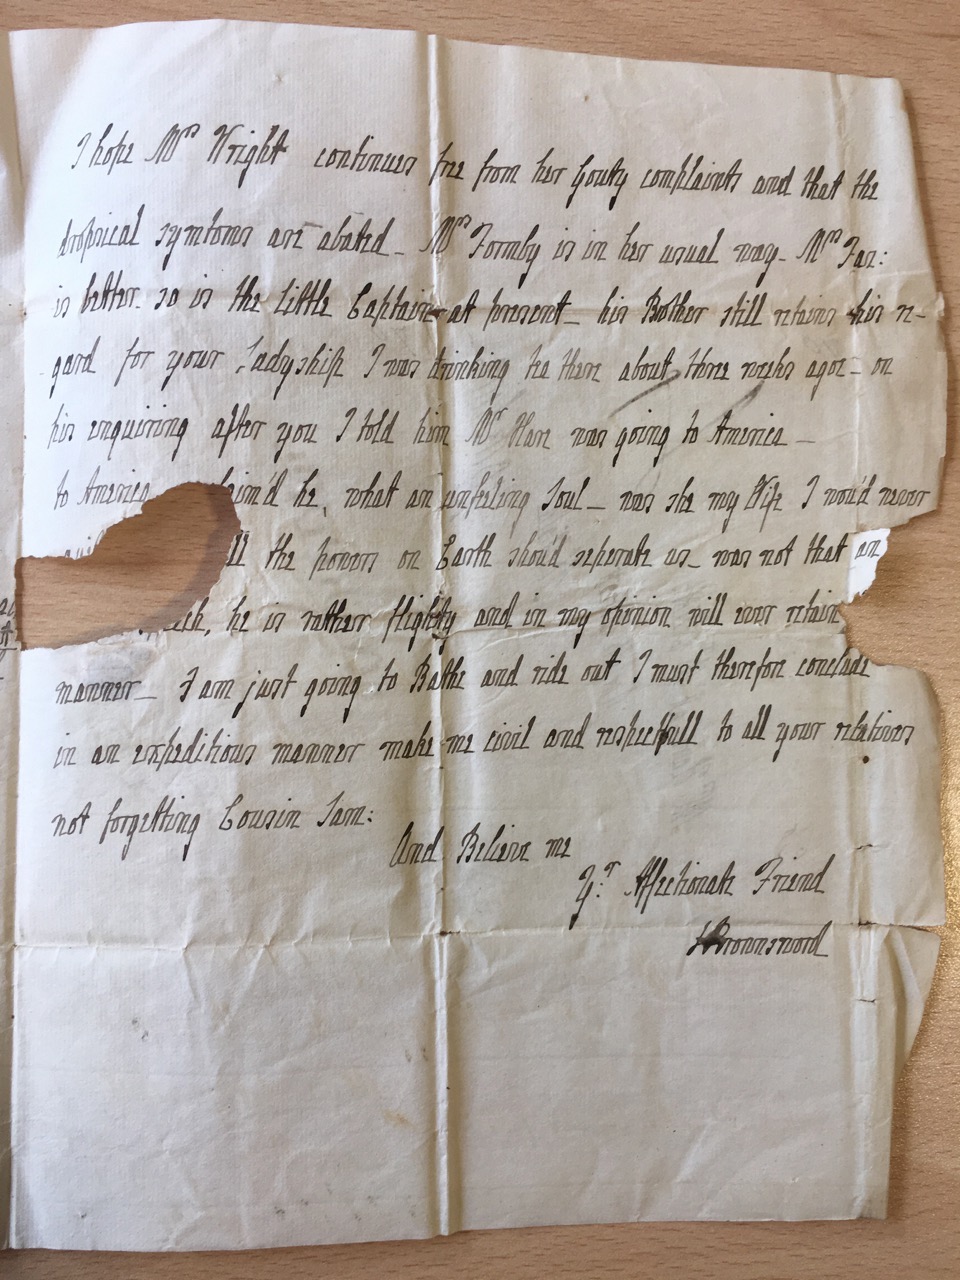 Image #1 of letter: J[enny] Brownsword to Ann Hare, 21 August 1770